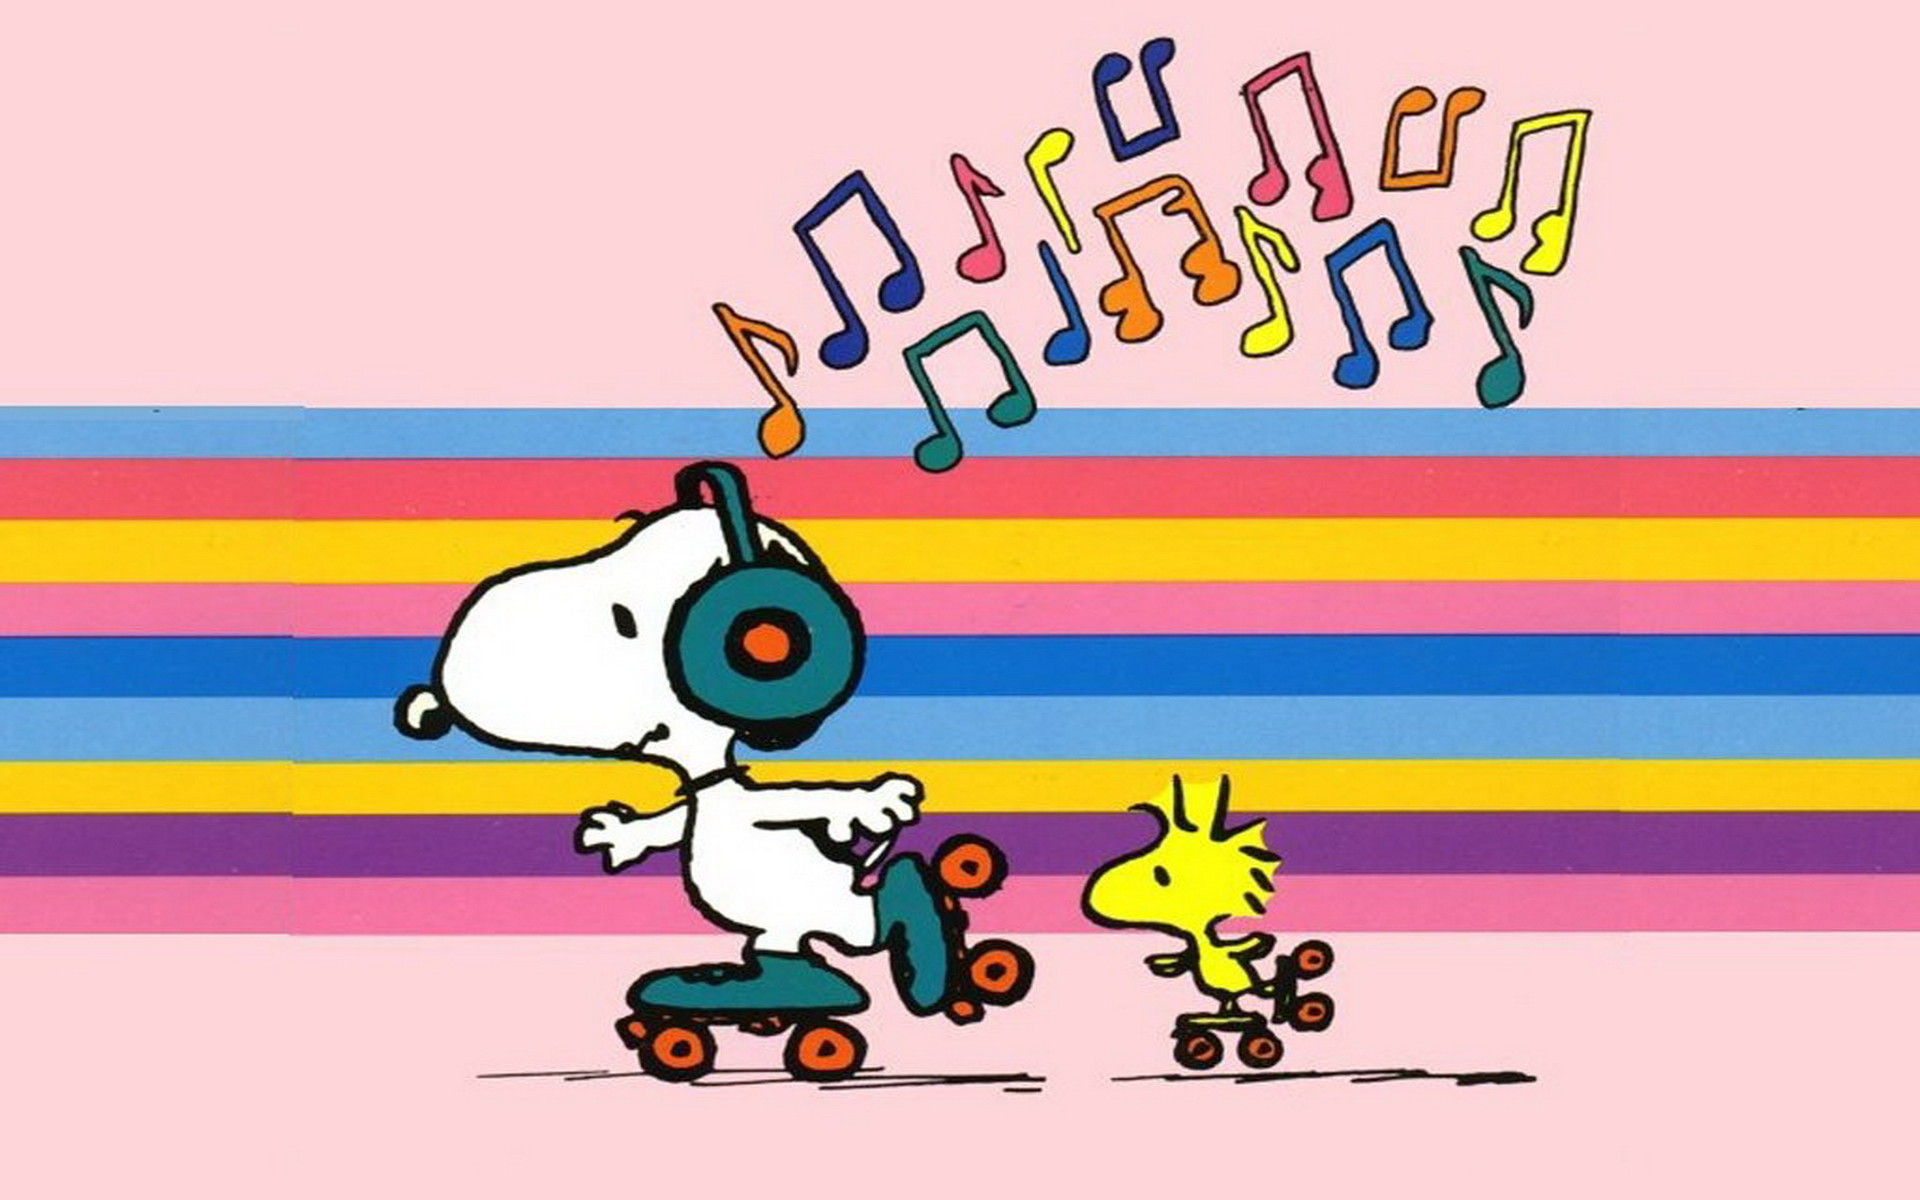 1920x1200 10 best ideas about Snoopy/Peanuts Backgrounds on Pinterest | The peanuts,  Search and Snoopy sleeping